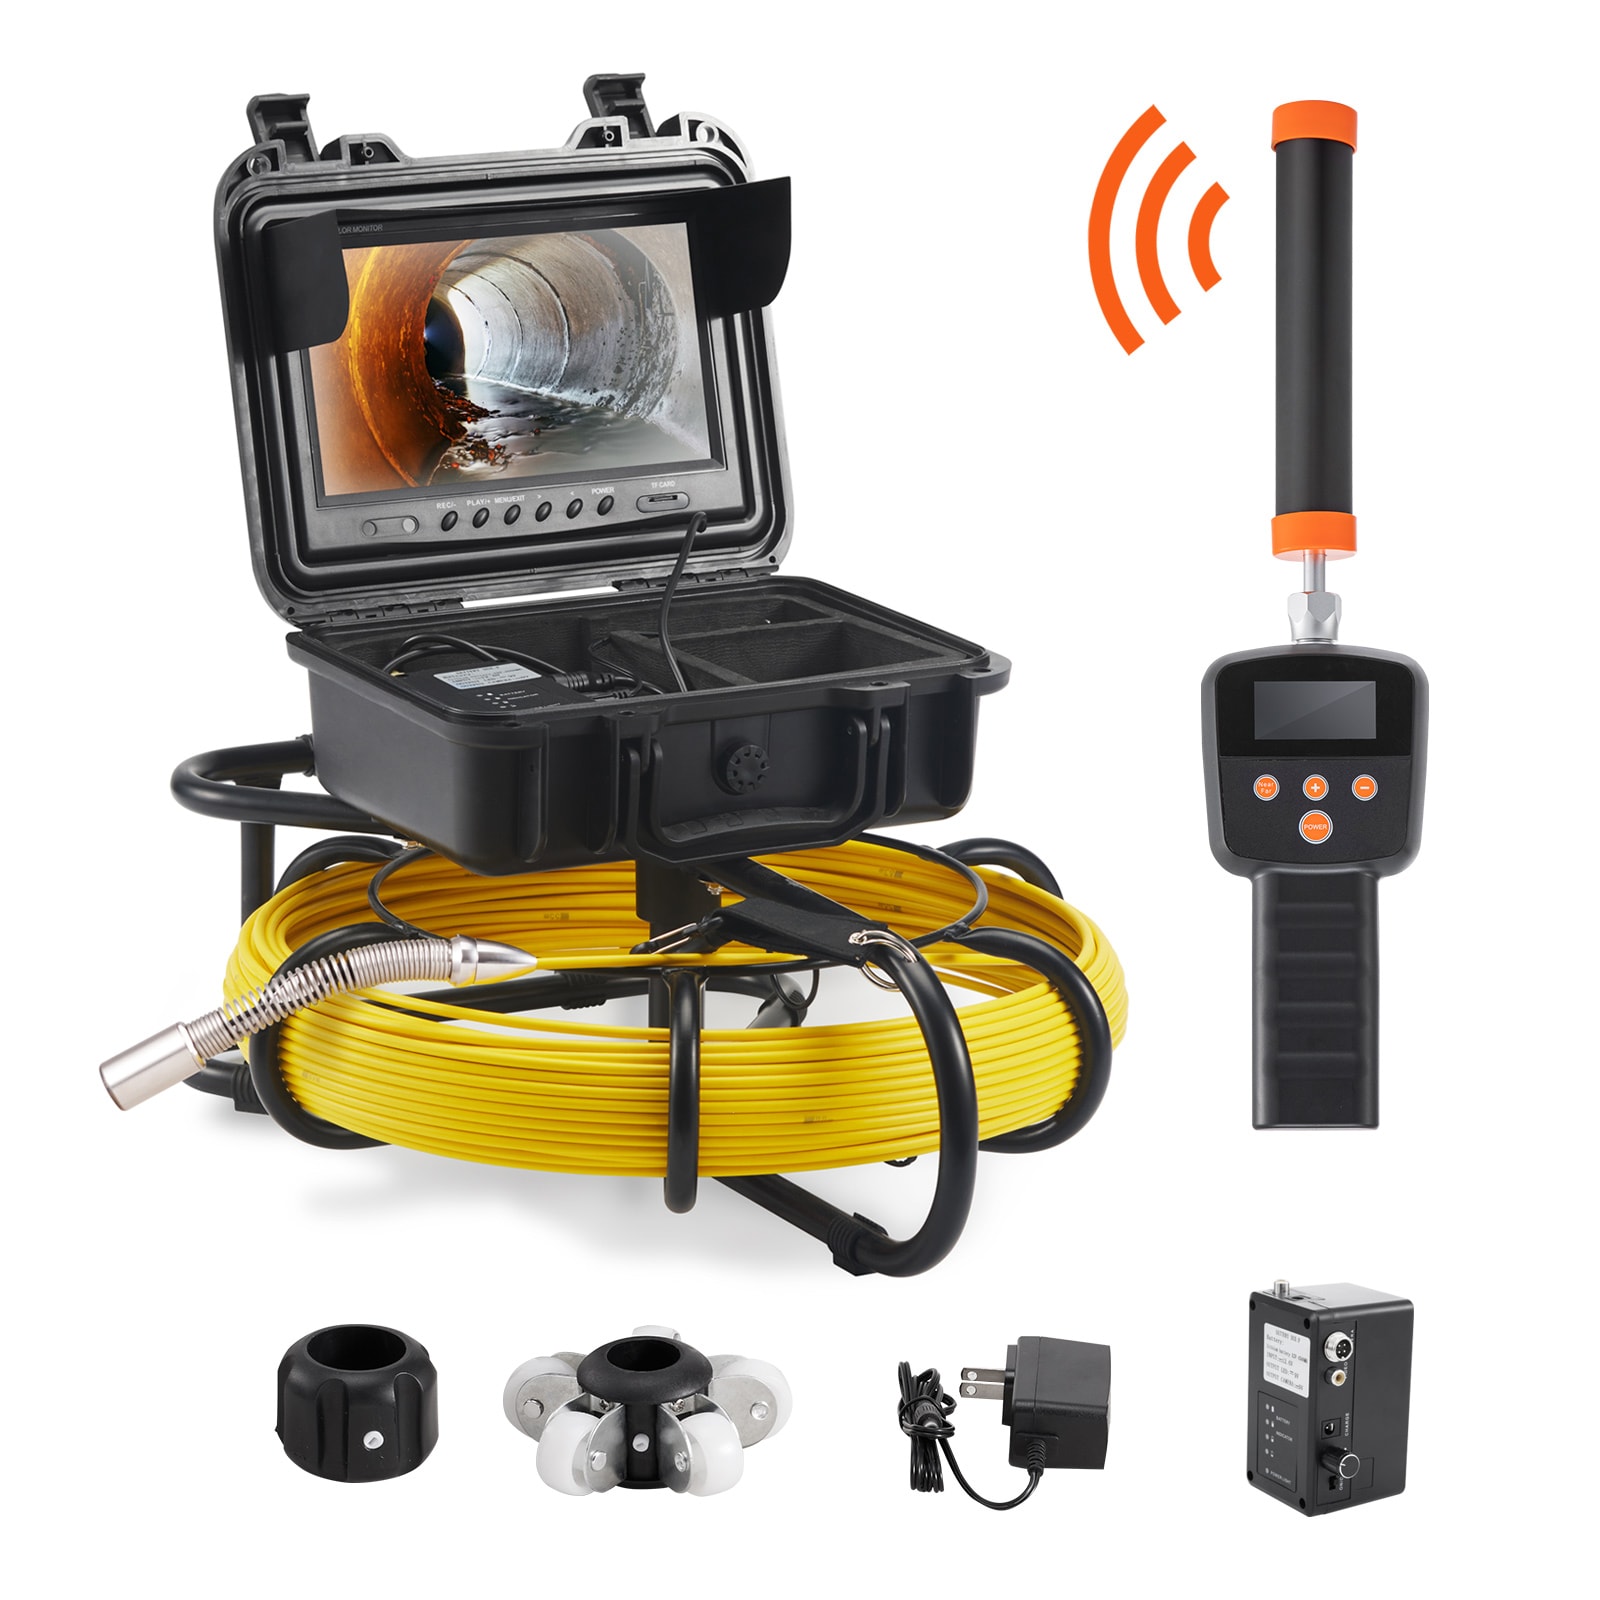 Endoscope 20M 30M 50M Sewer Pipe Inspection Video Camera, 16GB TF Card DVR  IP68 Drain Sewer Pipeline Industrial Endoscope with 4.3 Monitor Carrying